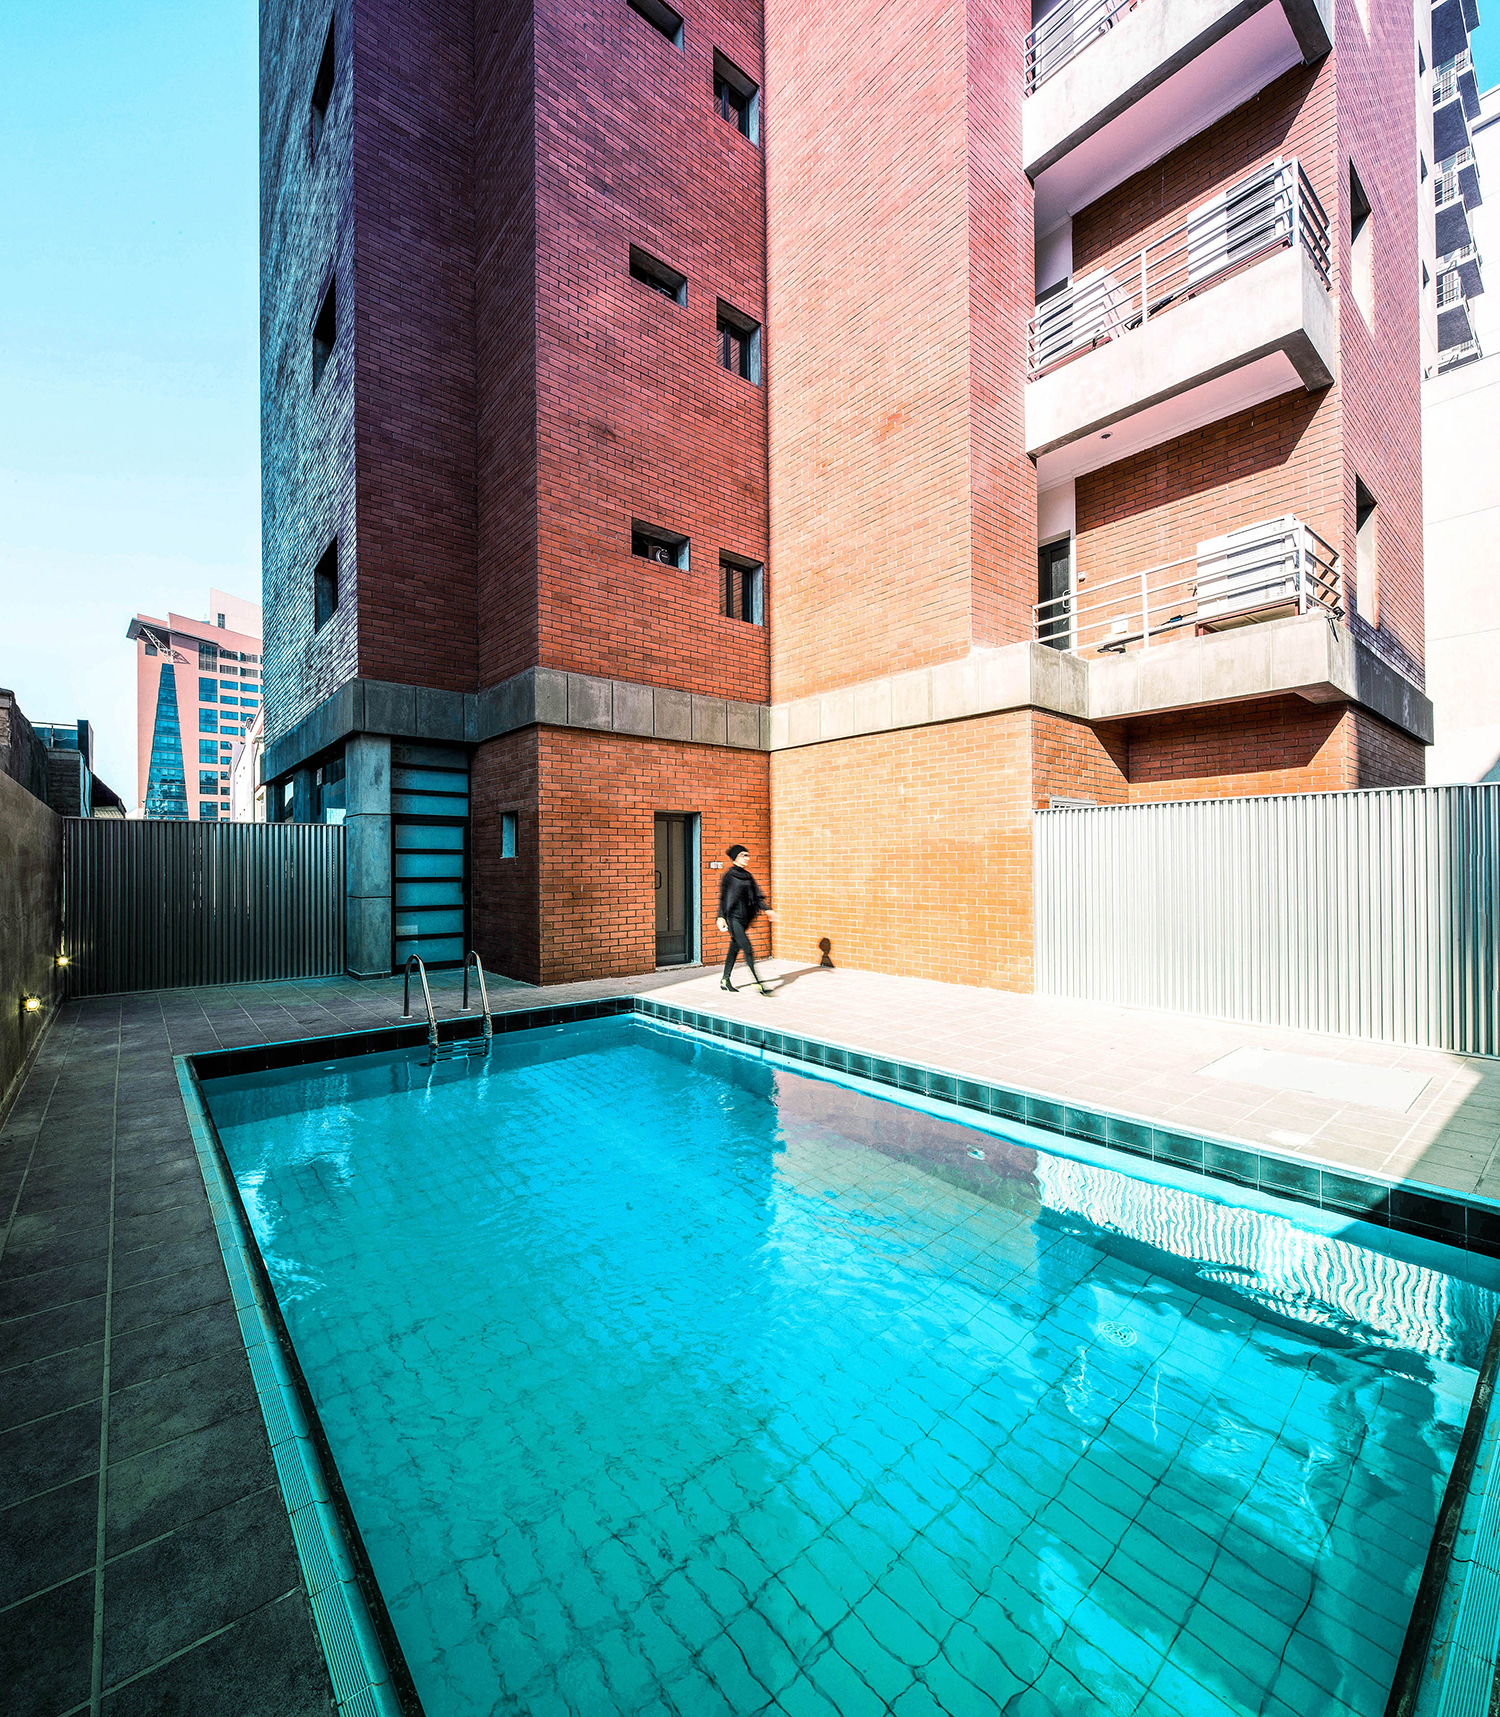 Swimming pool and rear balconies